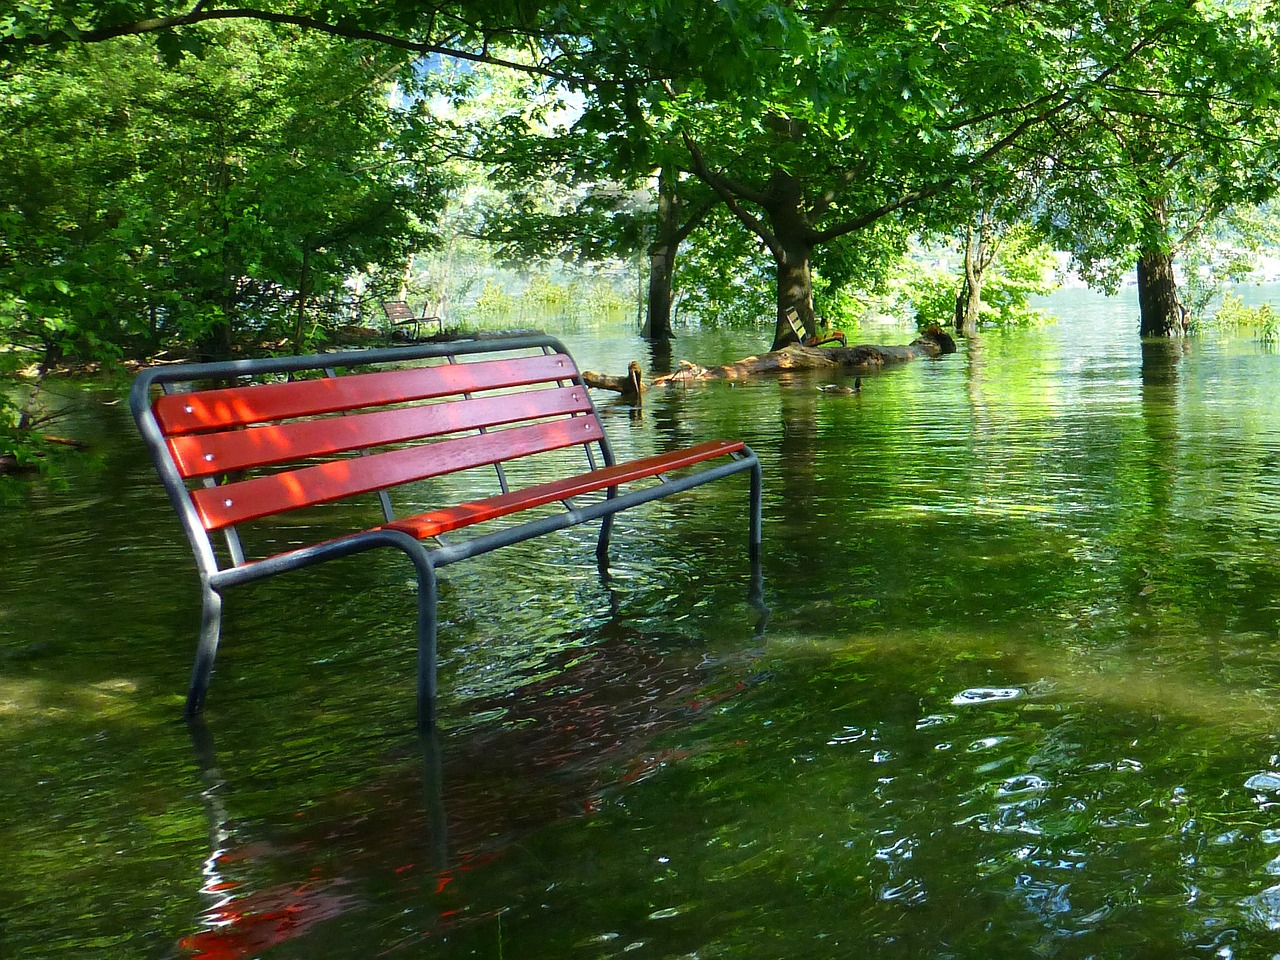 Photo of a park bench in a flooded area.